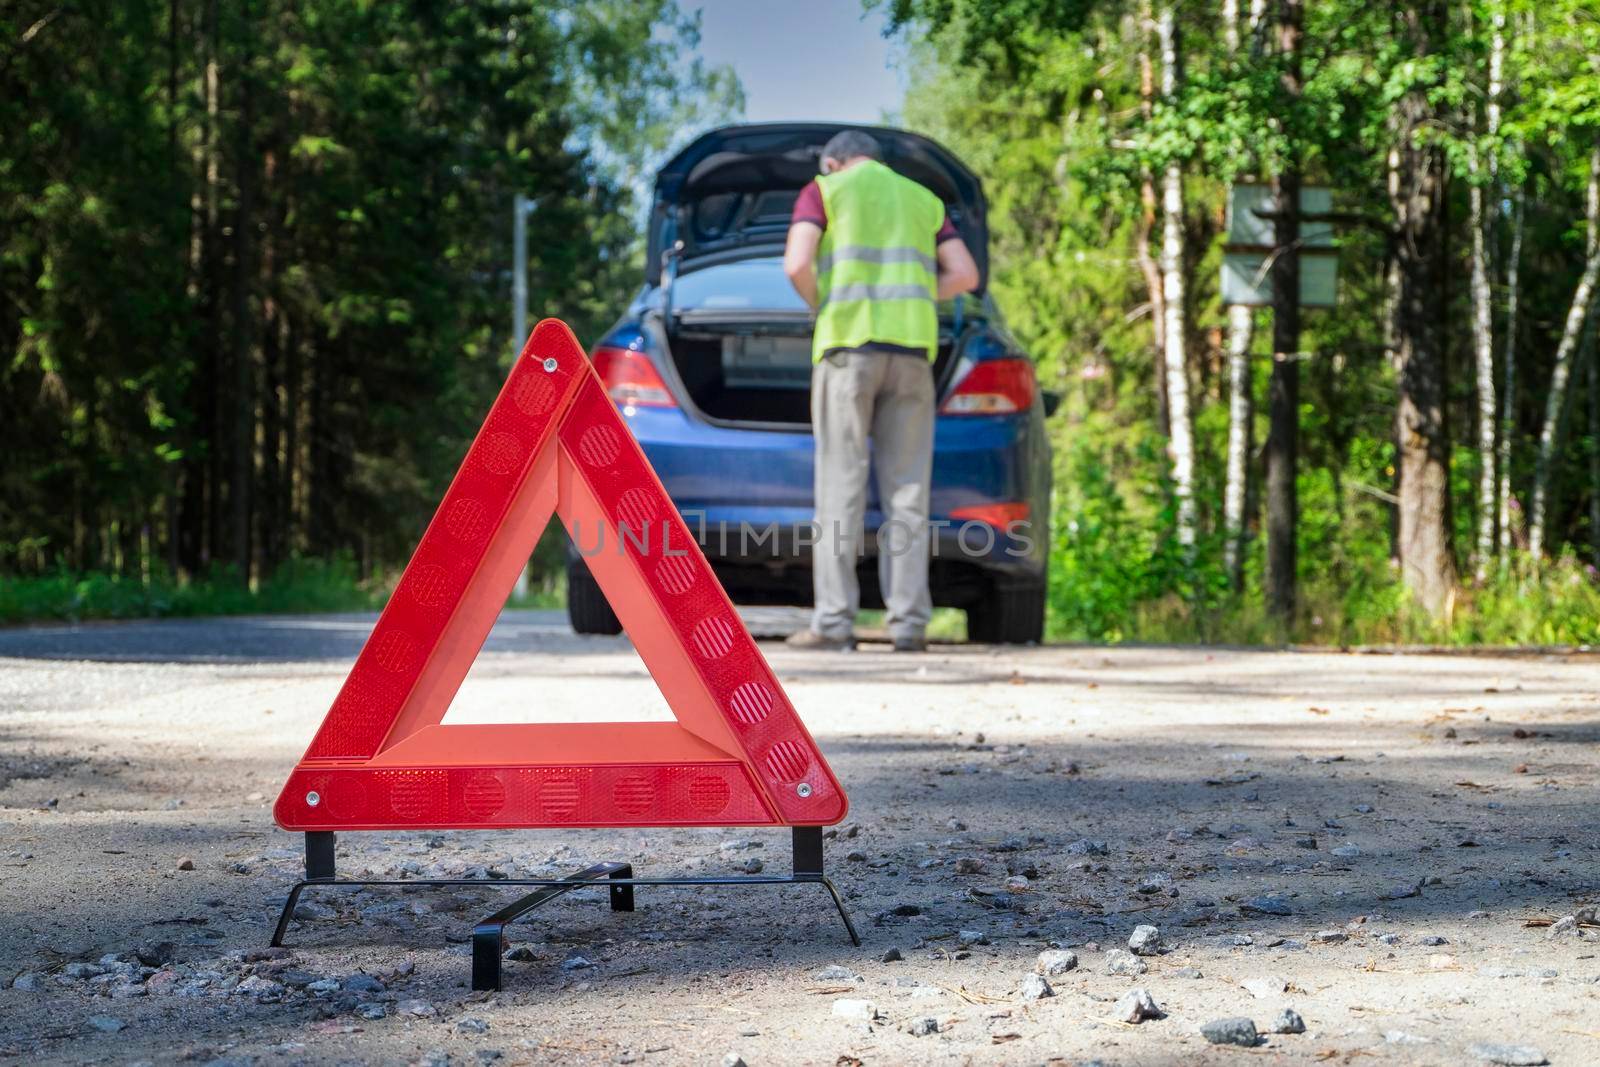 Red warning sign stands on the side of road next to damaged vehicle by OlgaGubskaya